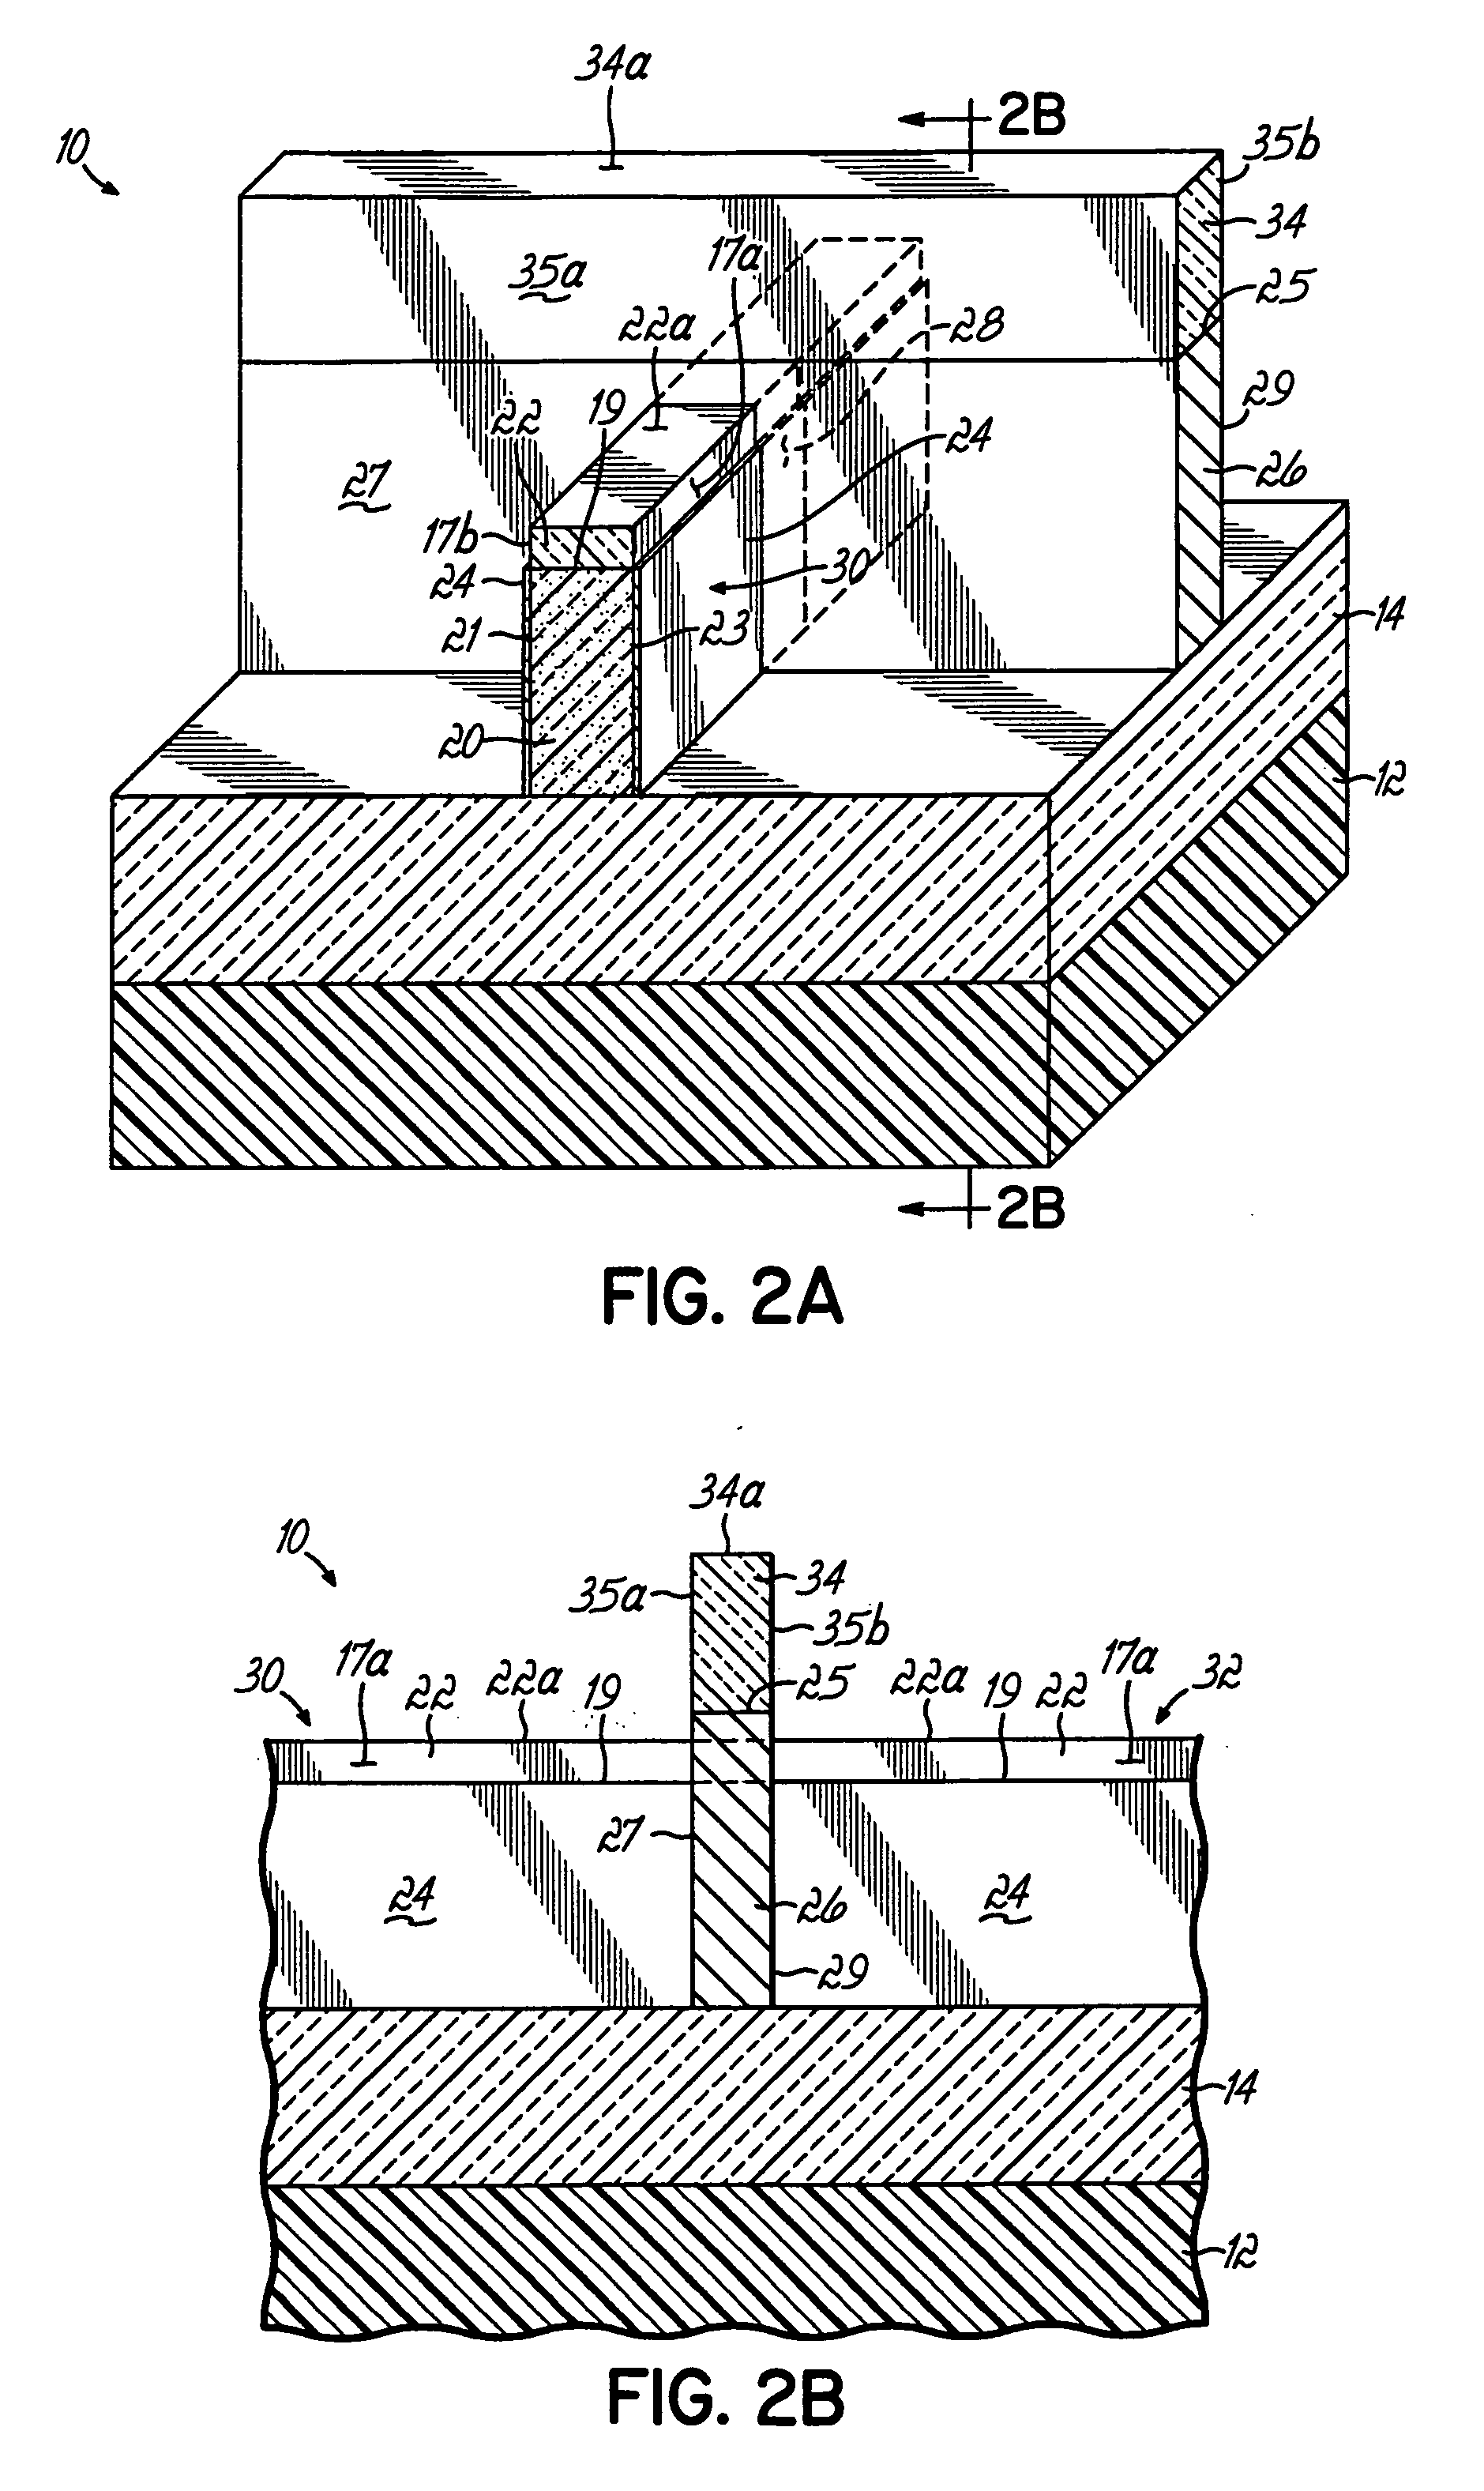 Semiconductor FinFET structures with encapsulated gate electrodes and methods for forming such semiconductor FinFET structures